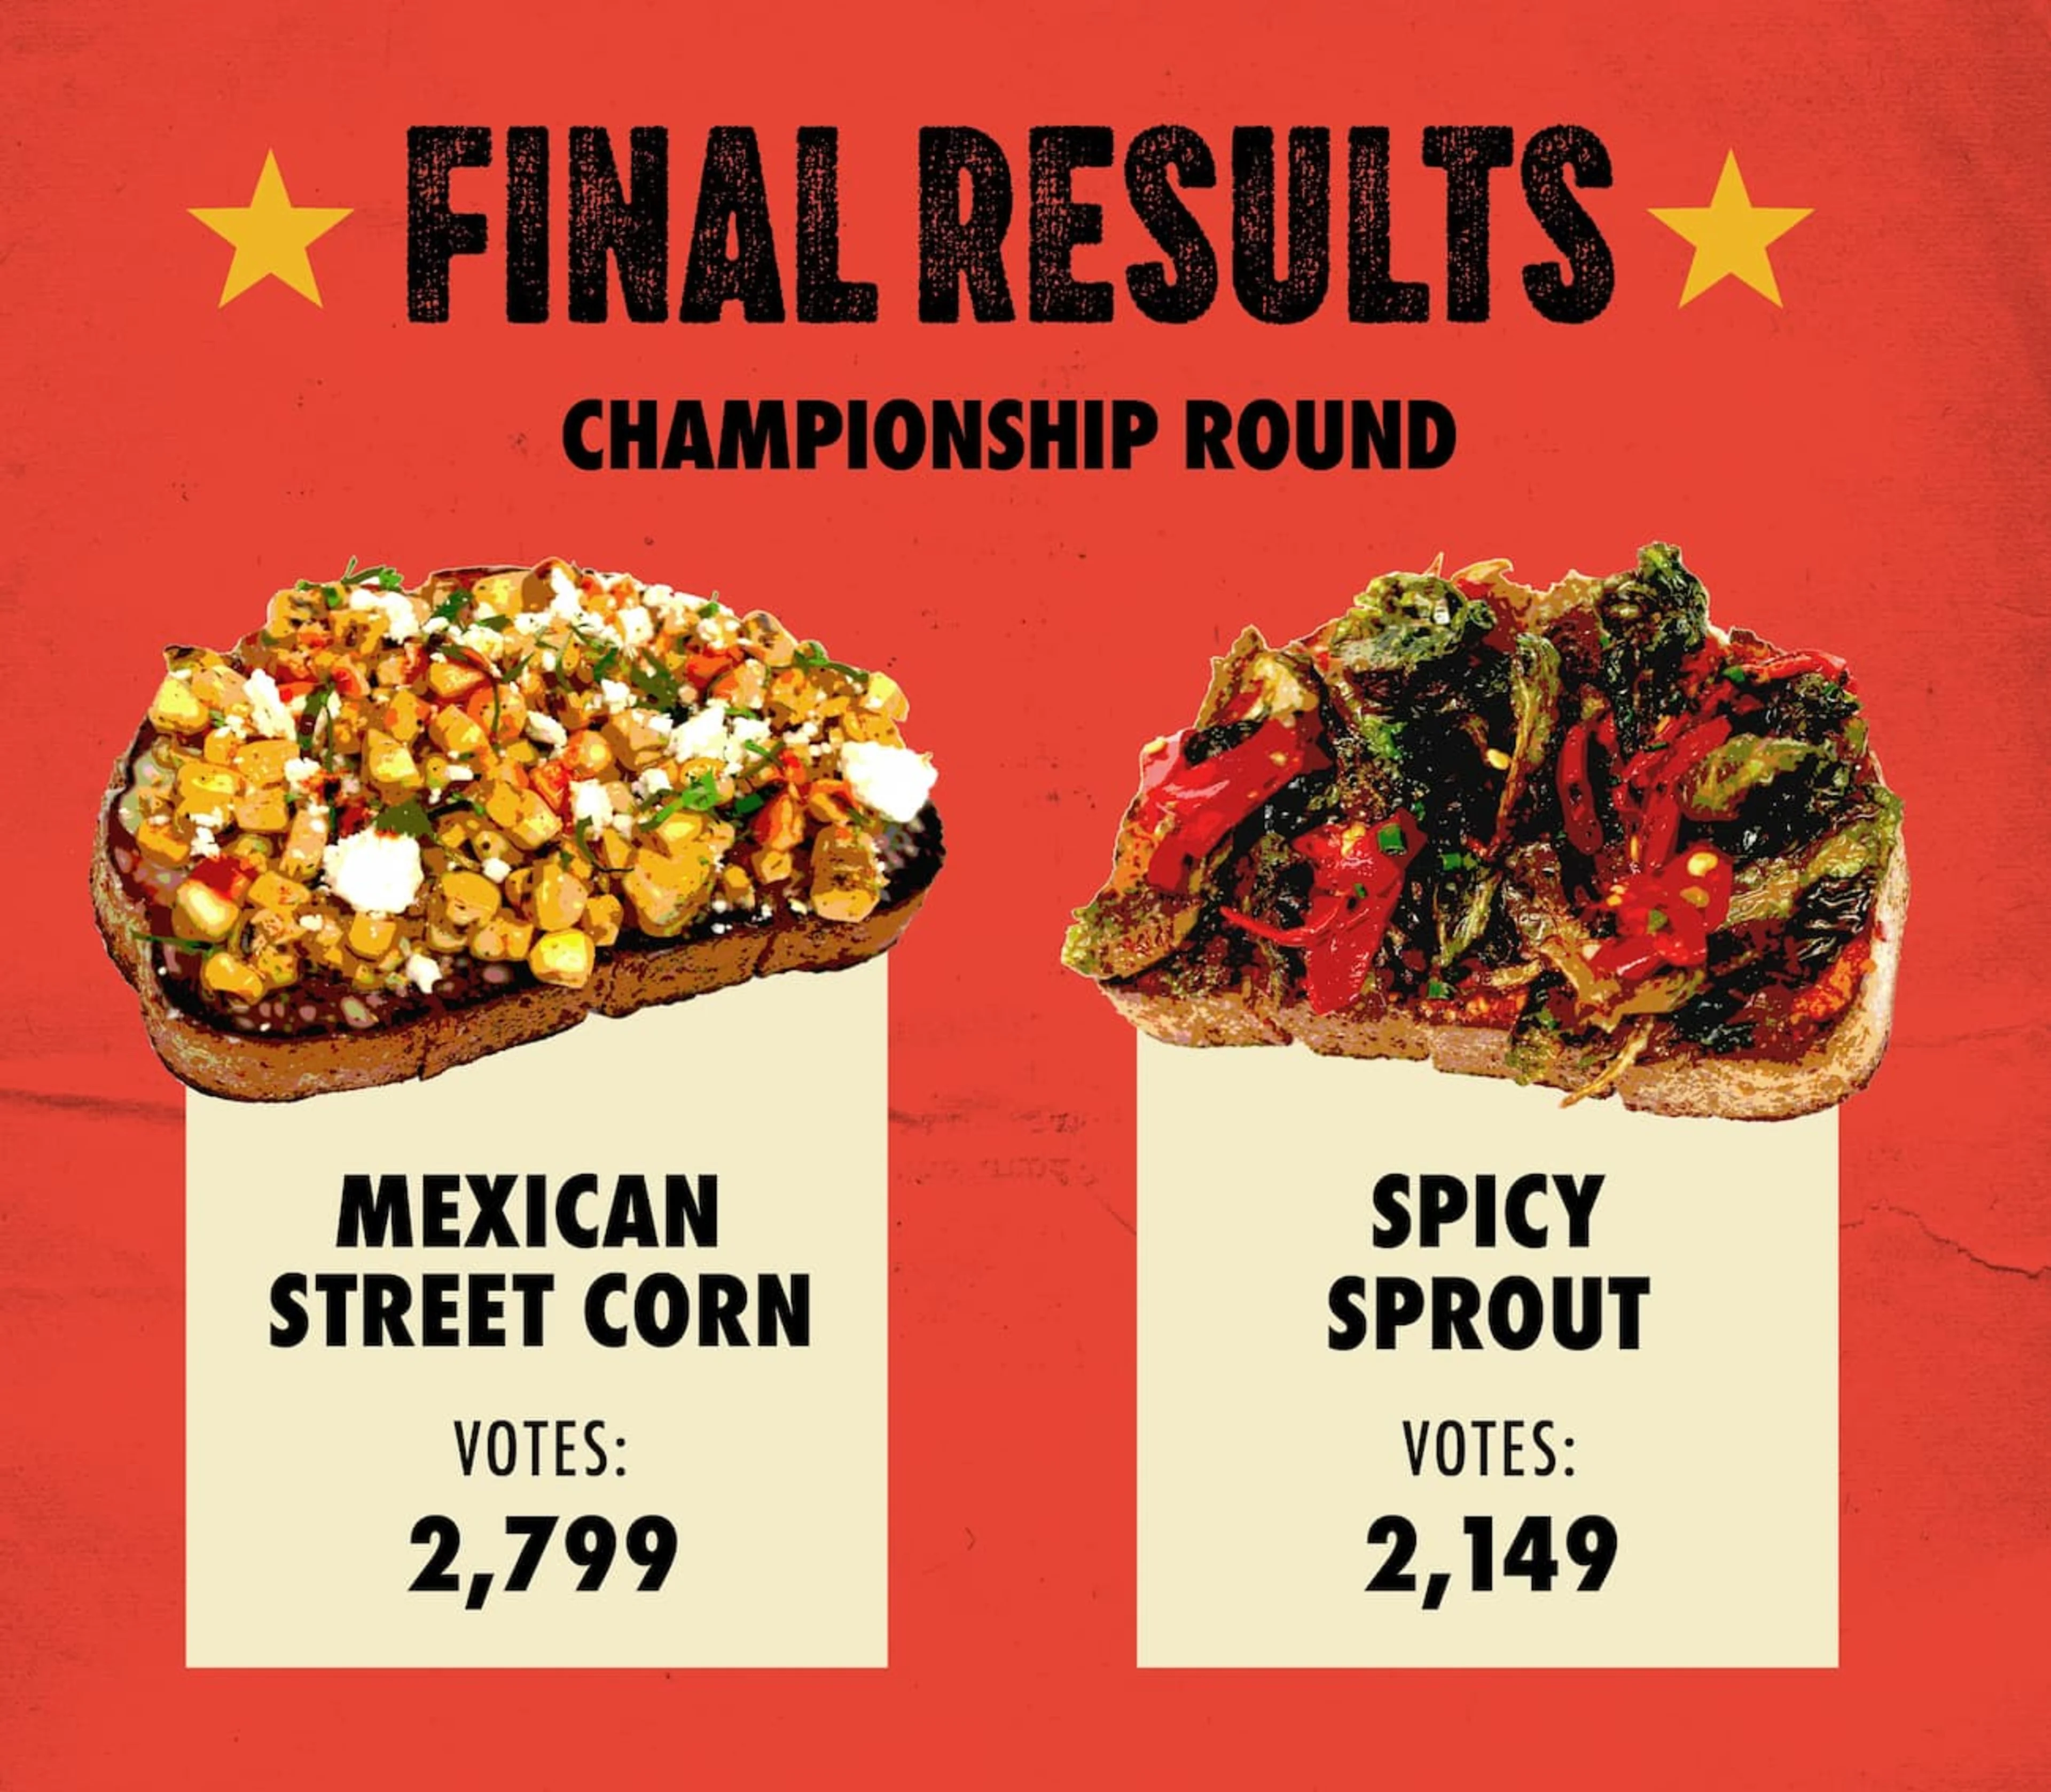 A Mexican street corn and spicy sprout bruschetta against a red background.